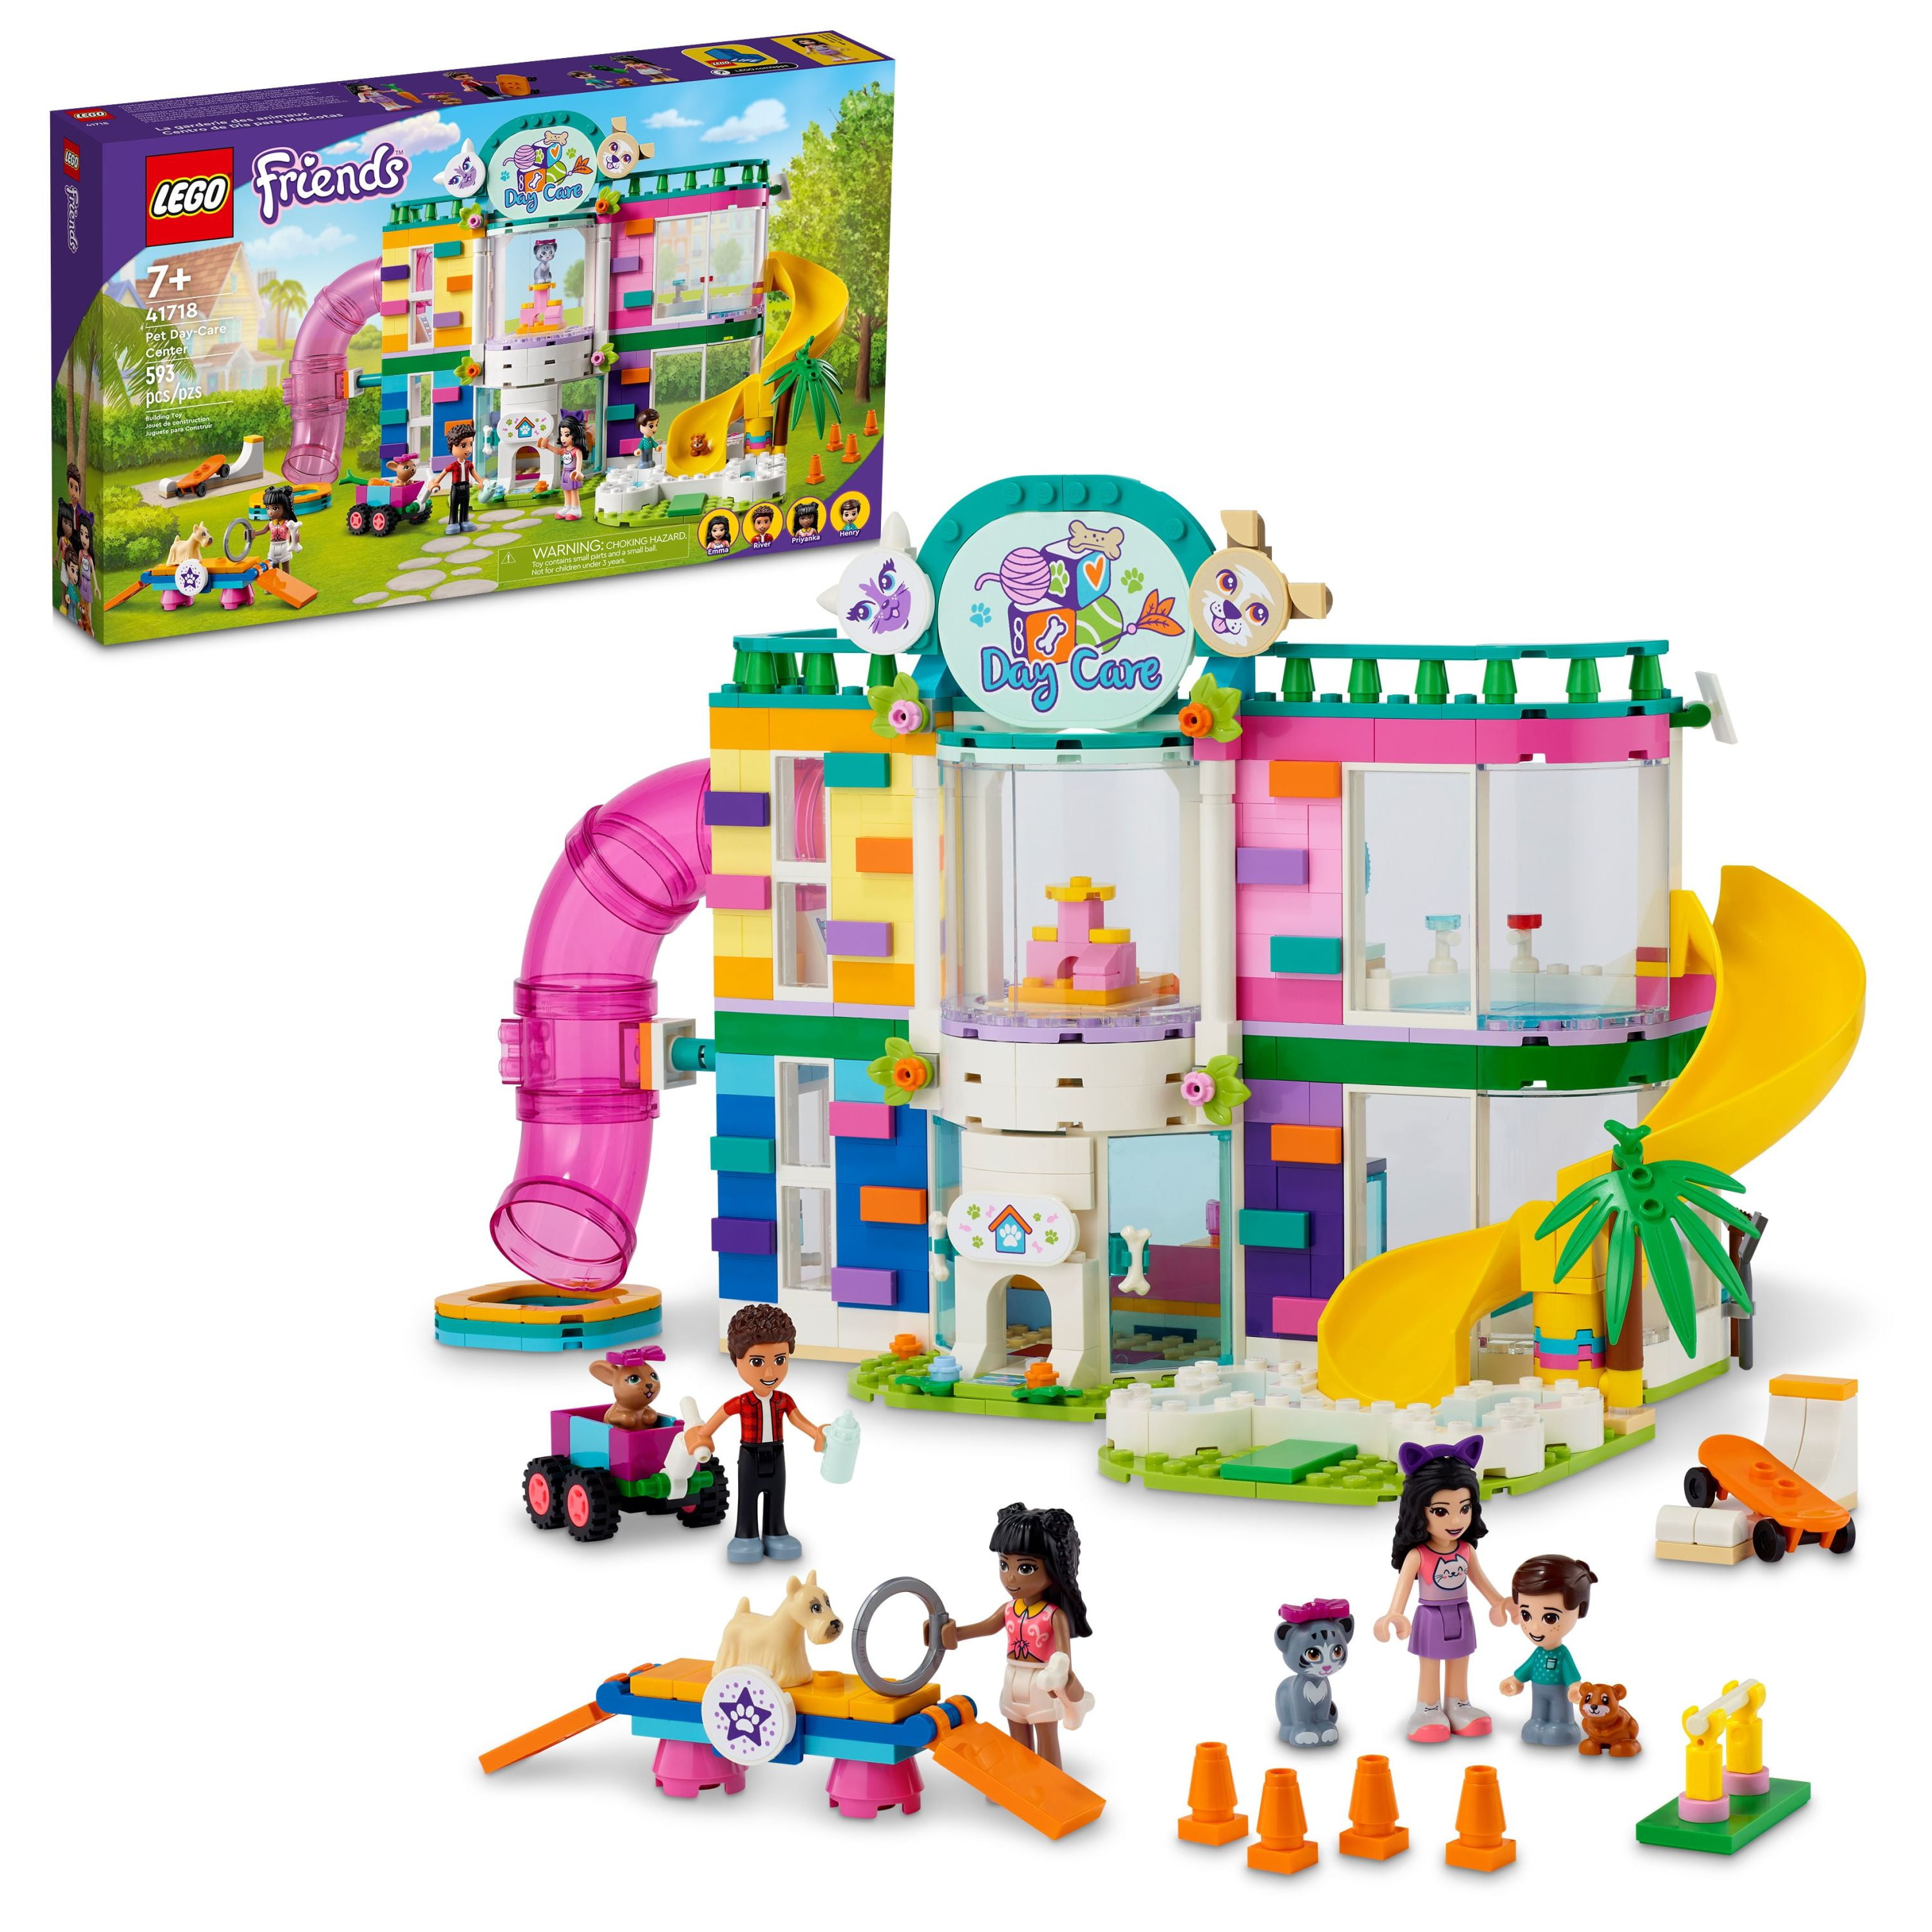 LEGO Friends Pet Day-Care Center 41718 Animal Set, Heartlake City Toy,  Birthday Gifts for Kids, Girls and Boys 7 Plus Years Old, with Doggy Figure  & 3 Mini Dolls 